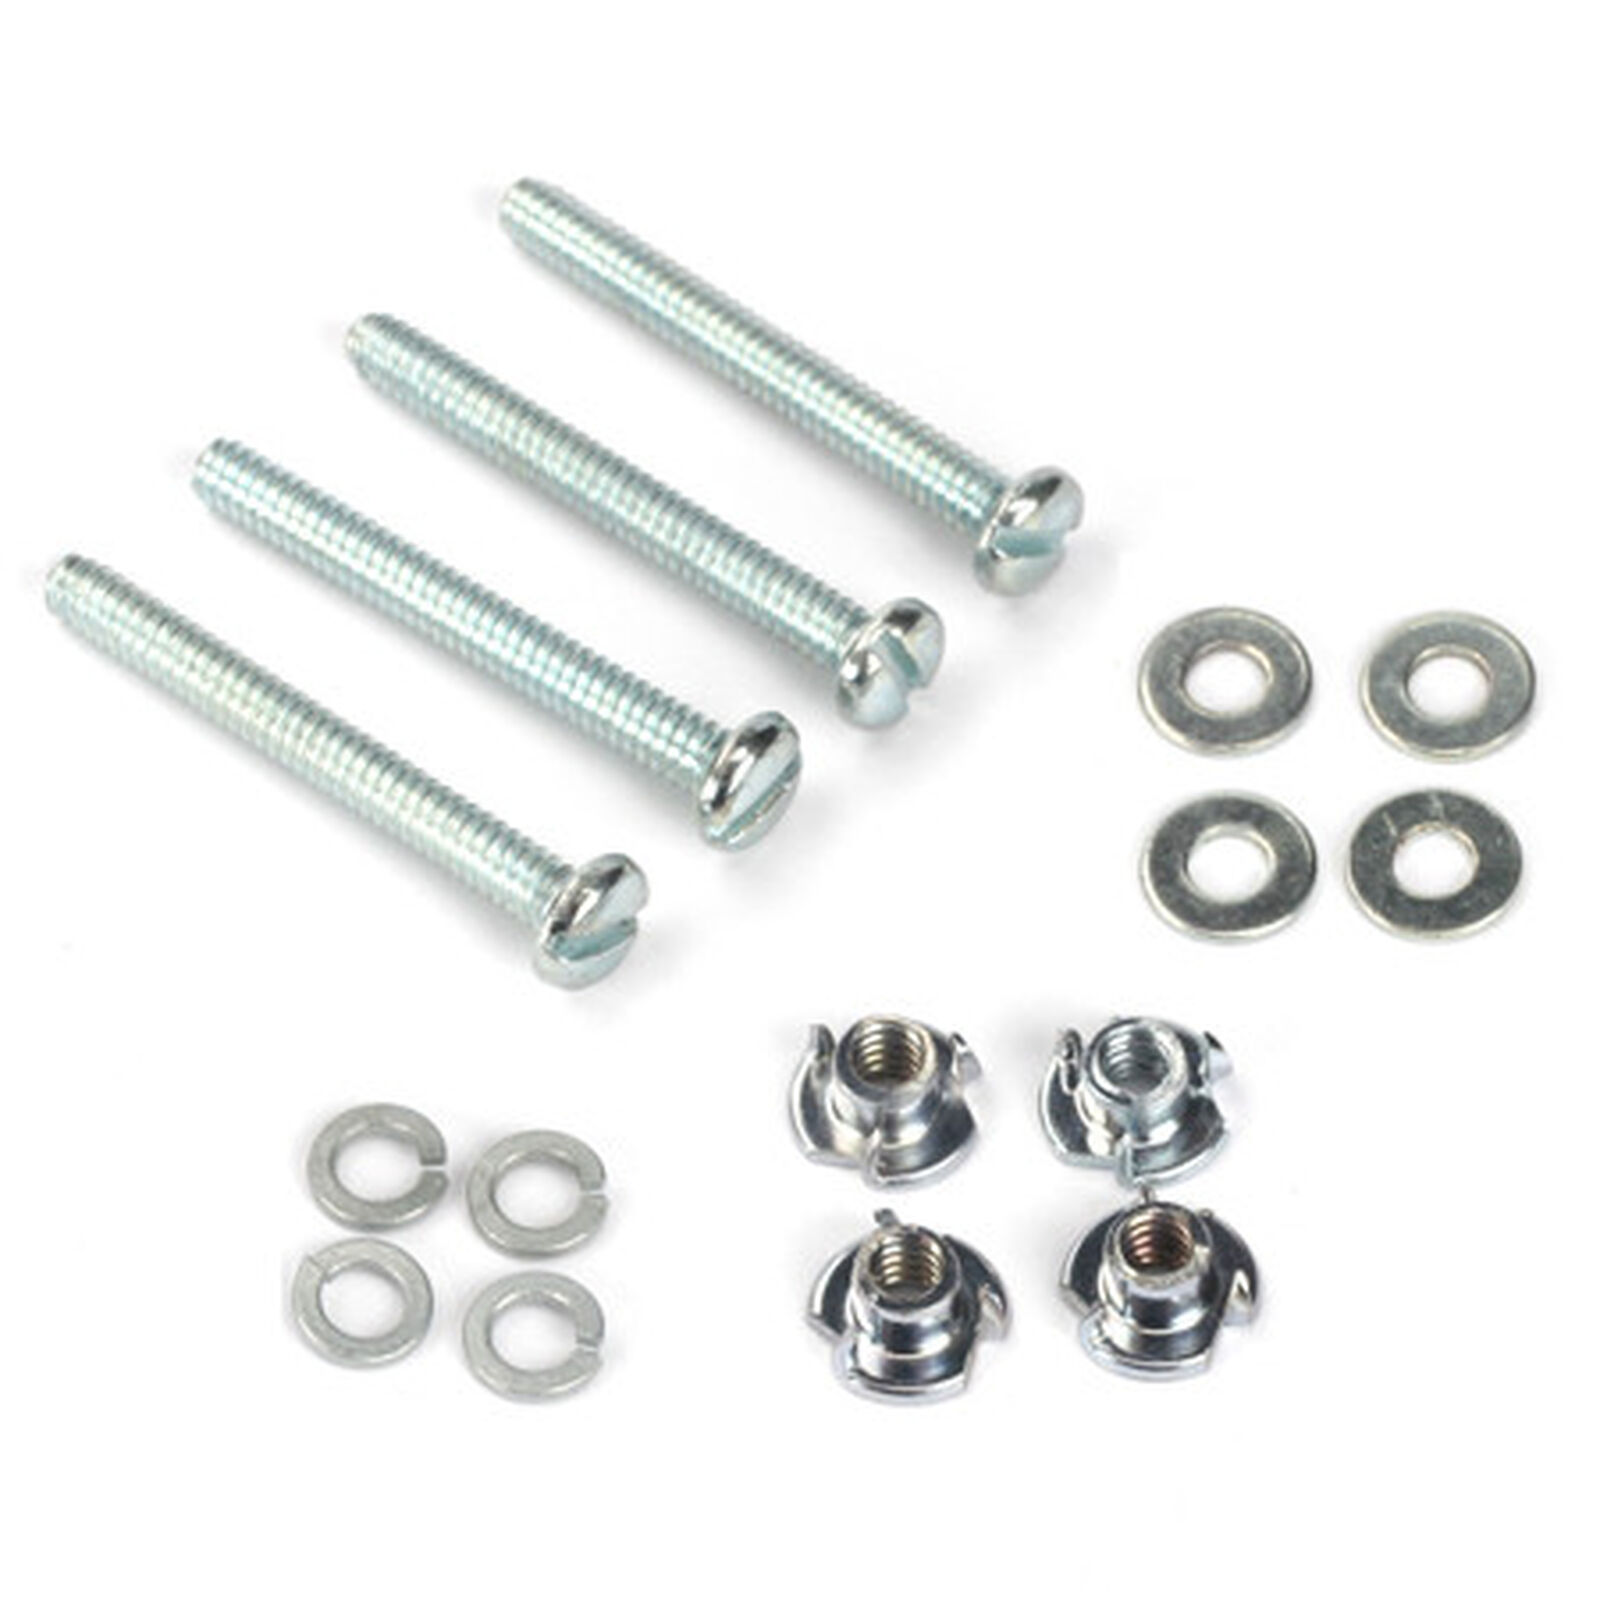 Mounting Bolts & Nuts, 6-32 x 1 1/4